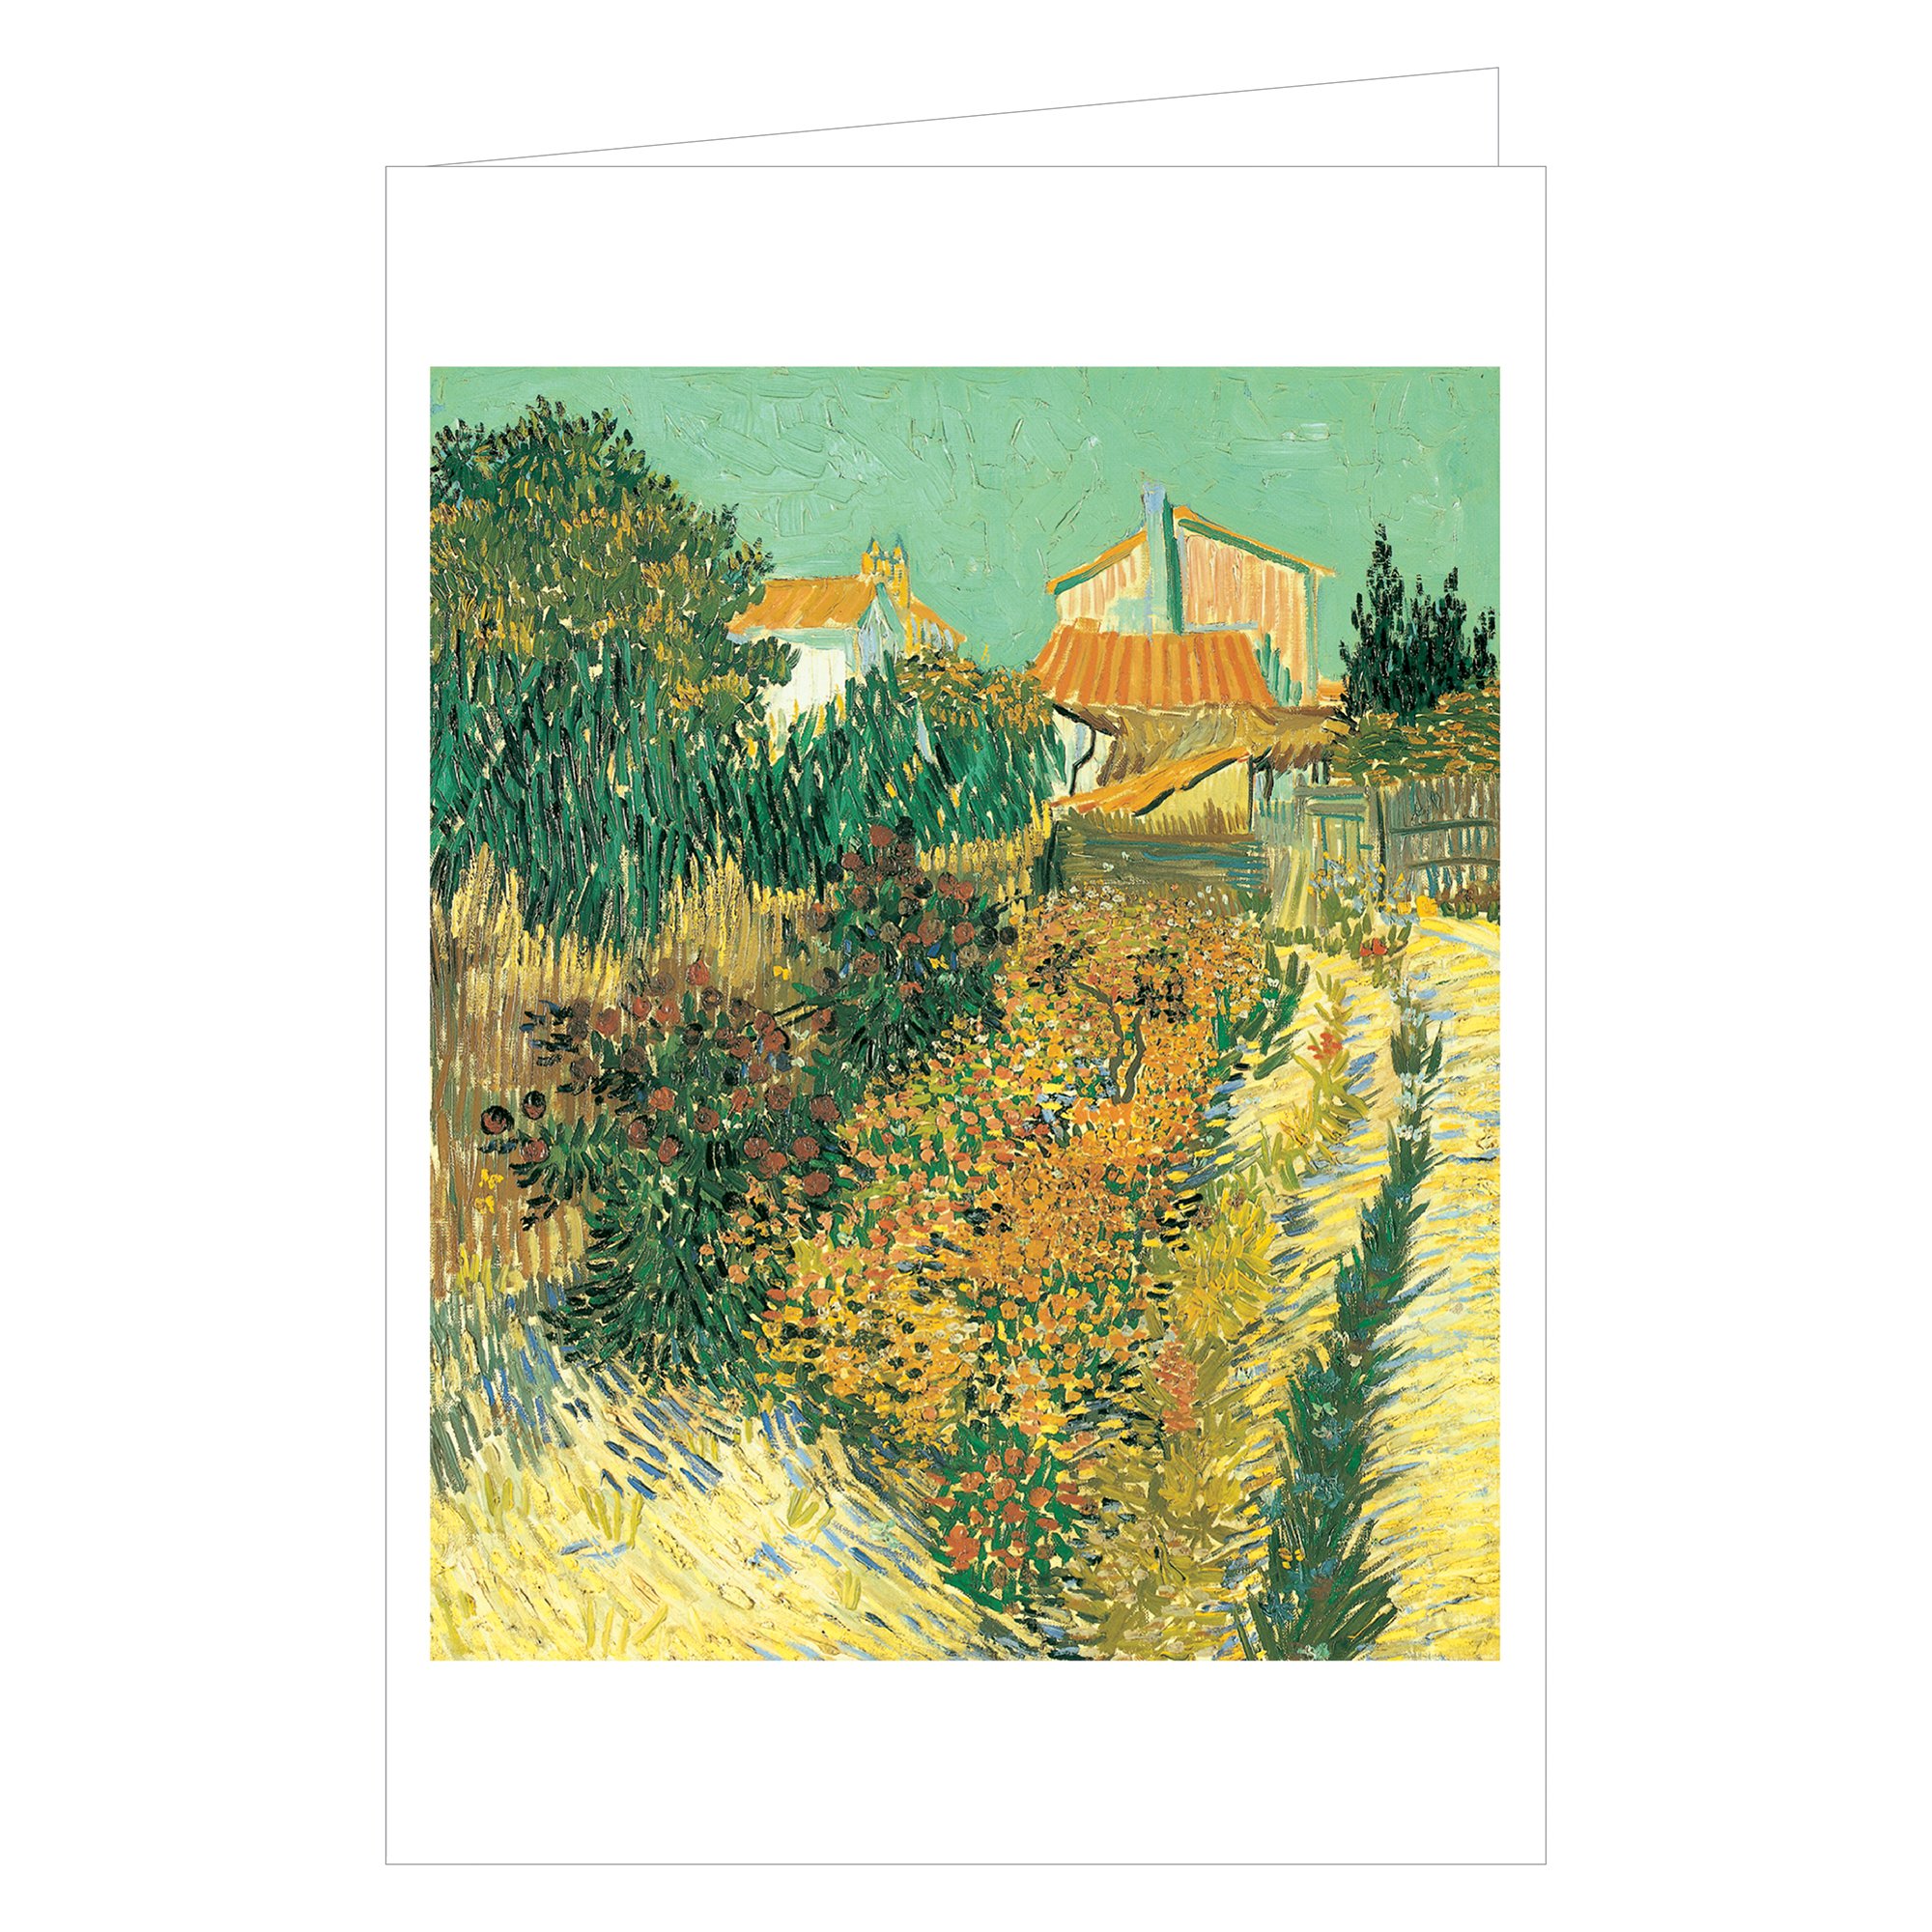 Vincent van Gogh's bright painting 'Sunflowers' to notecard box, by teNeues stationery.